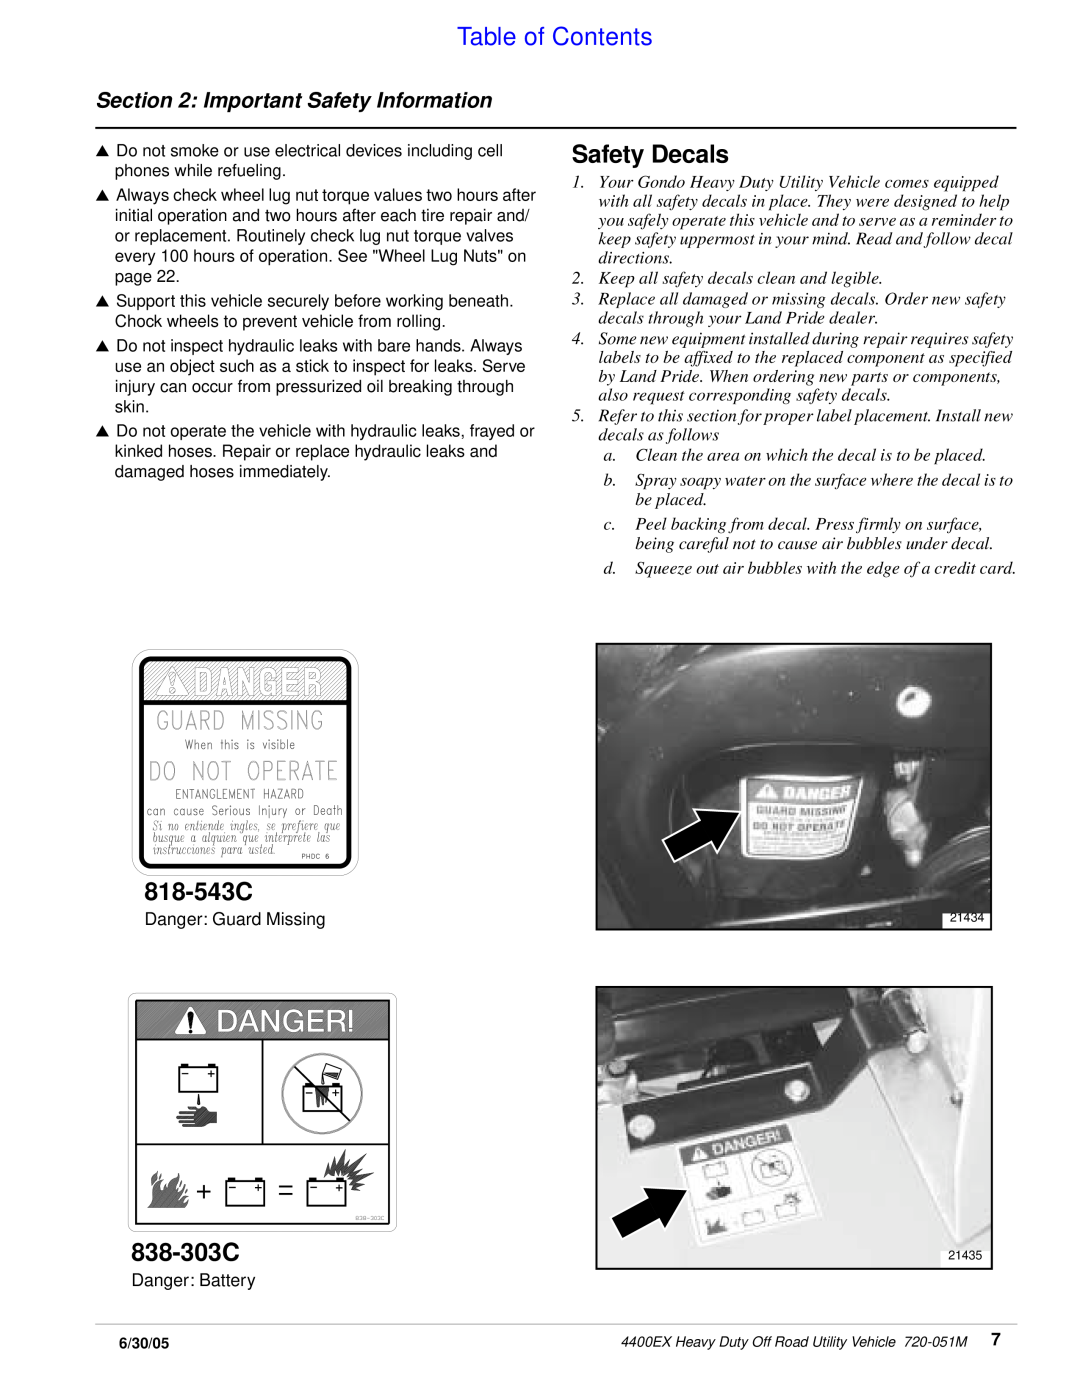 Land Pride 4400ex manual Safety Decals, 818-543C, 838-303C, Table of Contents, Important Safety Information 